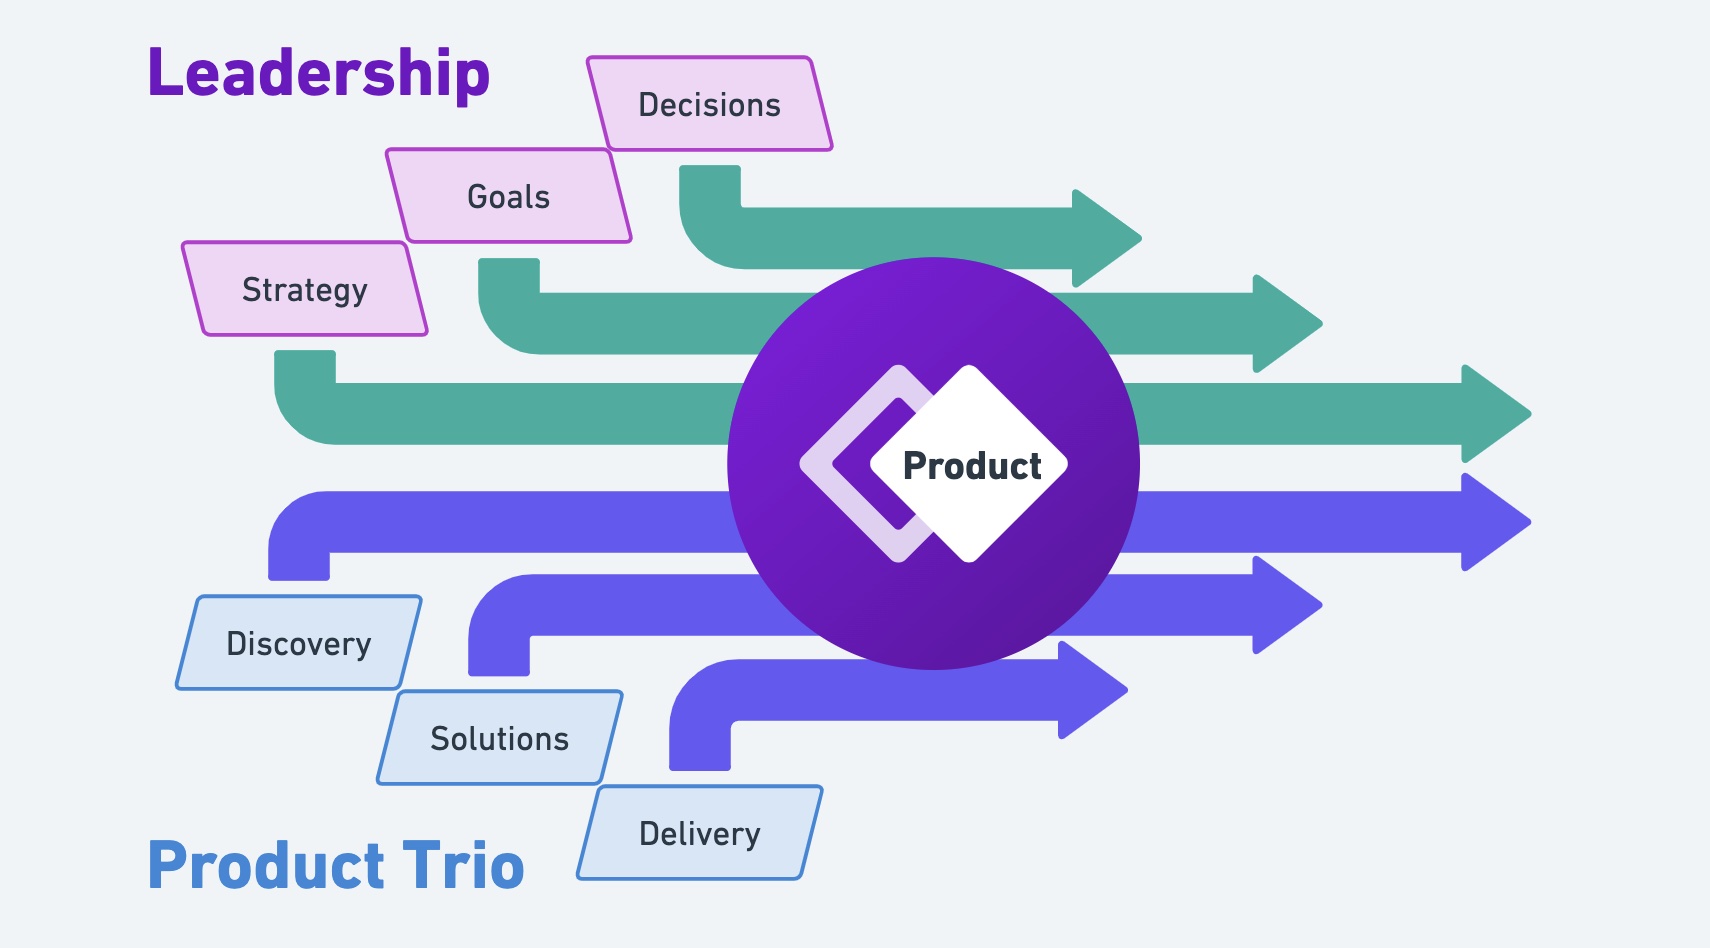 Leadership team provides Strategy, Goals & Directions. The Product Trio provides Discovery, Solutions & Delivery. All of this moves the product forward.